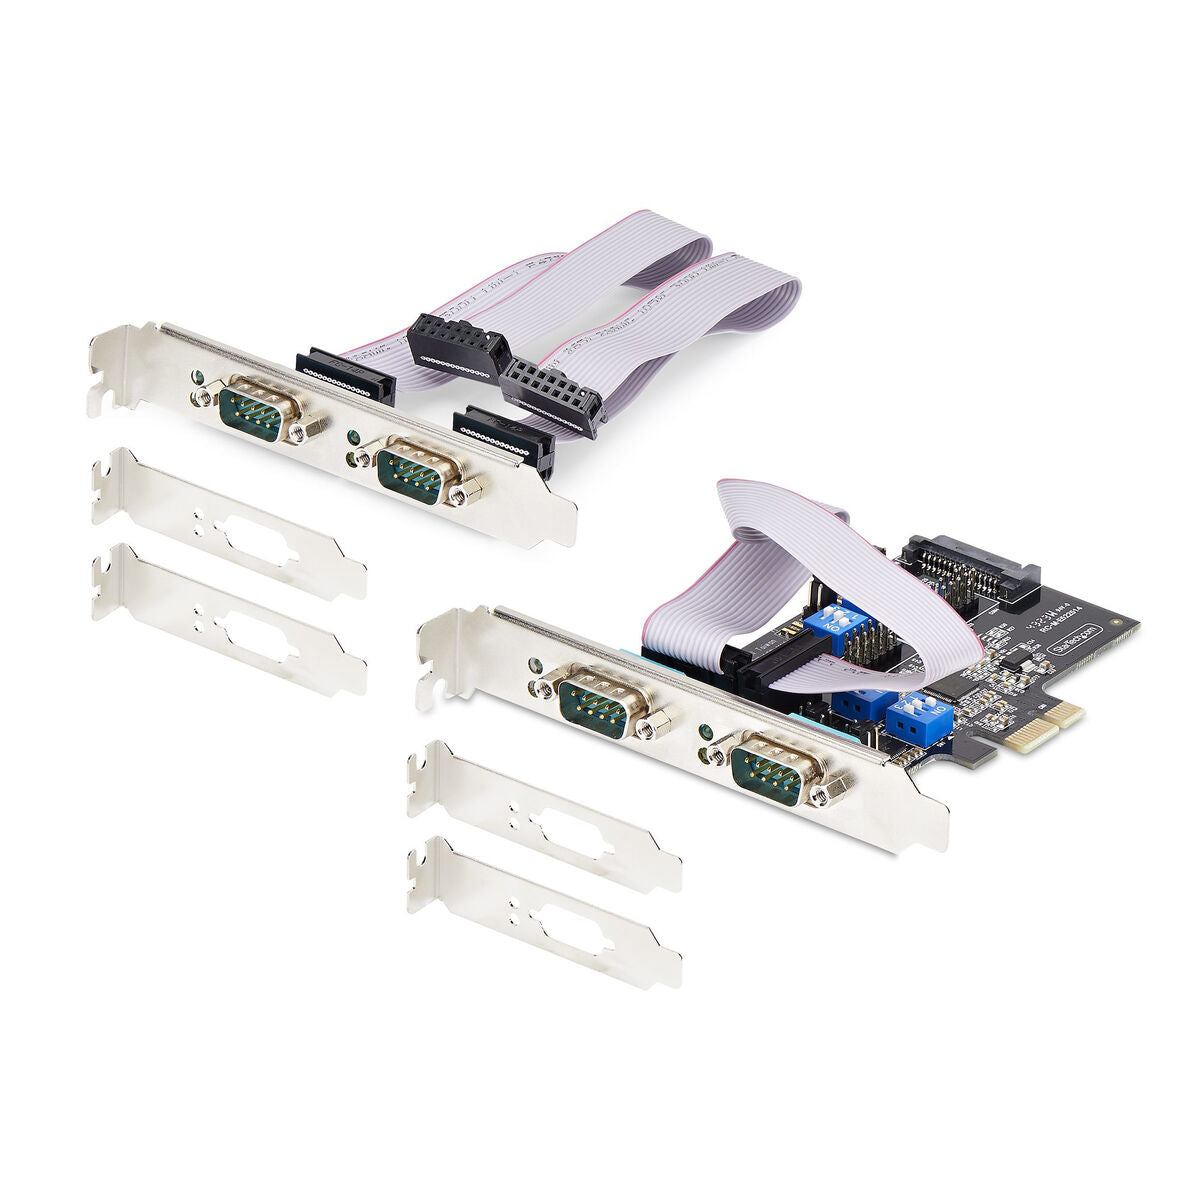 PCI Card Startech PS74ADF-SERIAL-CARD, Startech, Computing, Components, pci-card-startech-ps74adf-serial-card, Brand_Startech, category-reference-2609, category-reference-2803, category-reference-2811, category-reference-t-19685, category-reference-t-19912, category-reference-t-21360, category-reference-t-25662, category-reference-t-29833, computers / components, Condition_NEW, Price_200 - 300, Teleworking, RiotNook